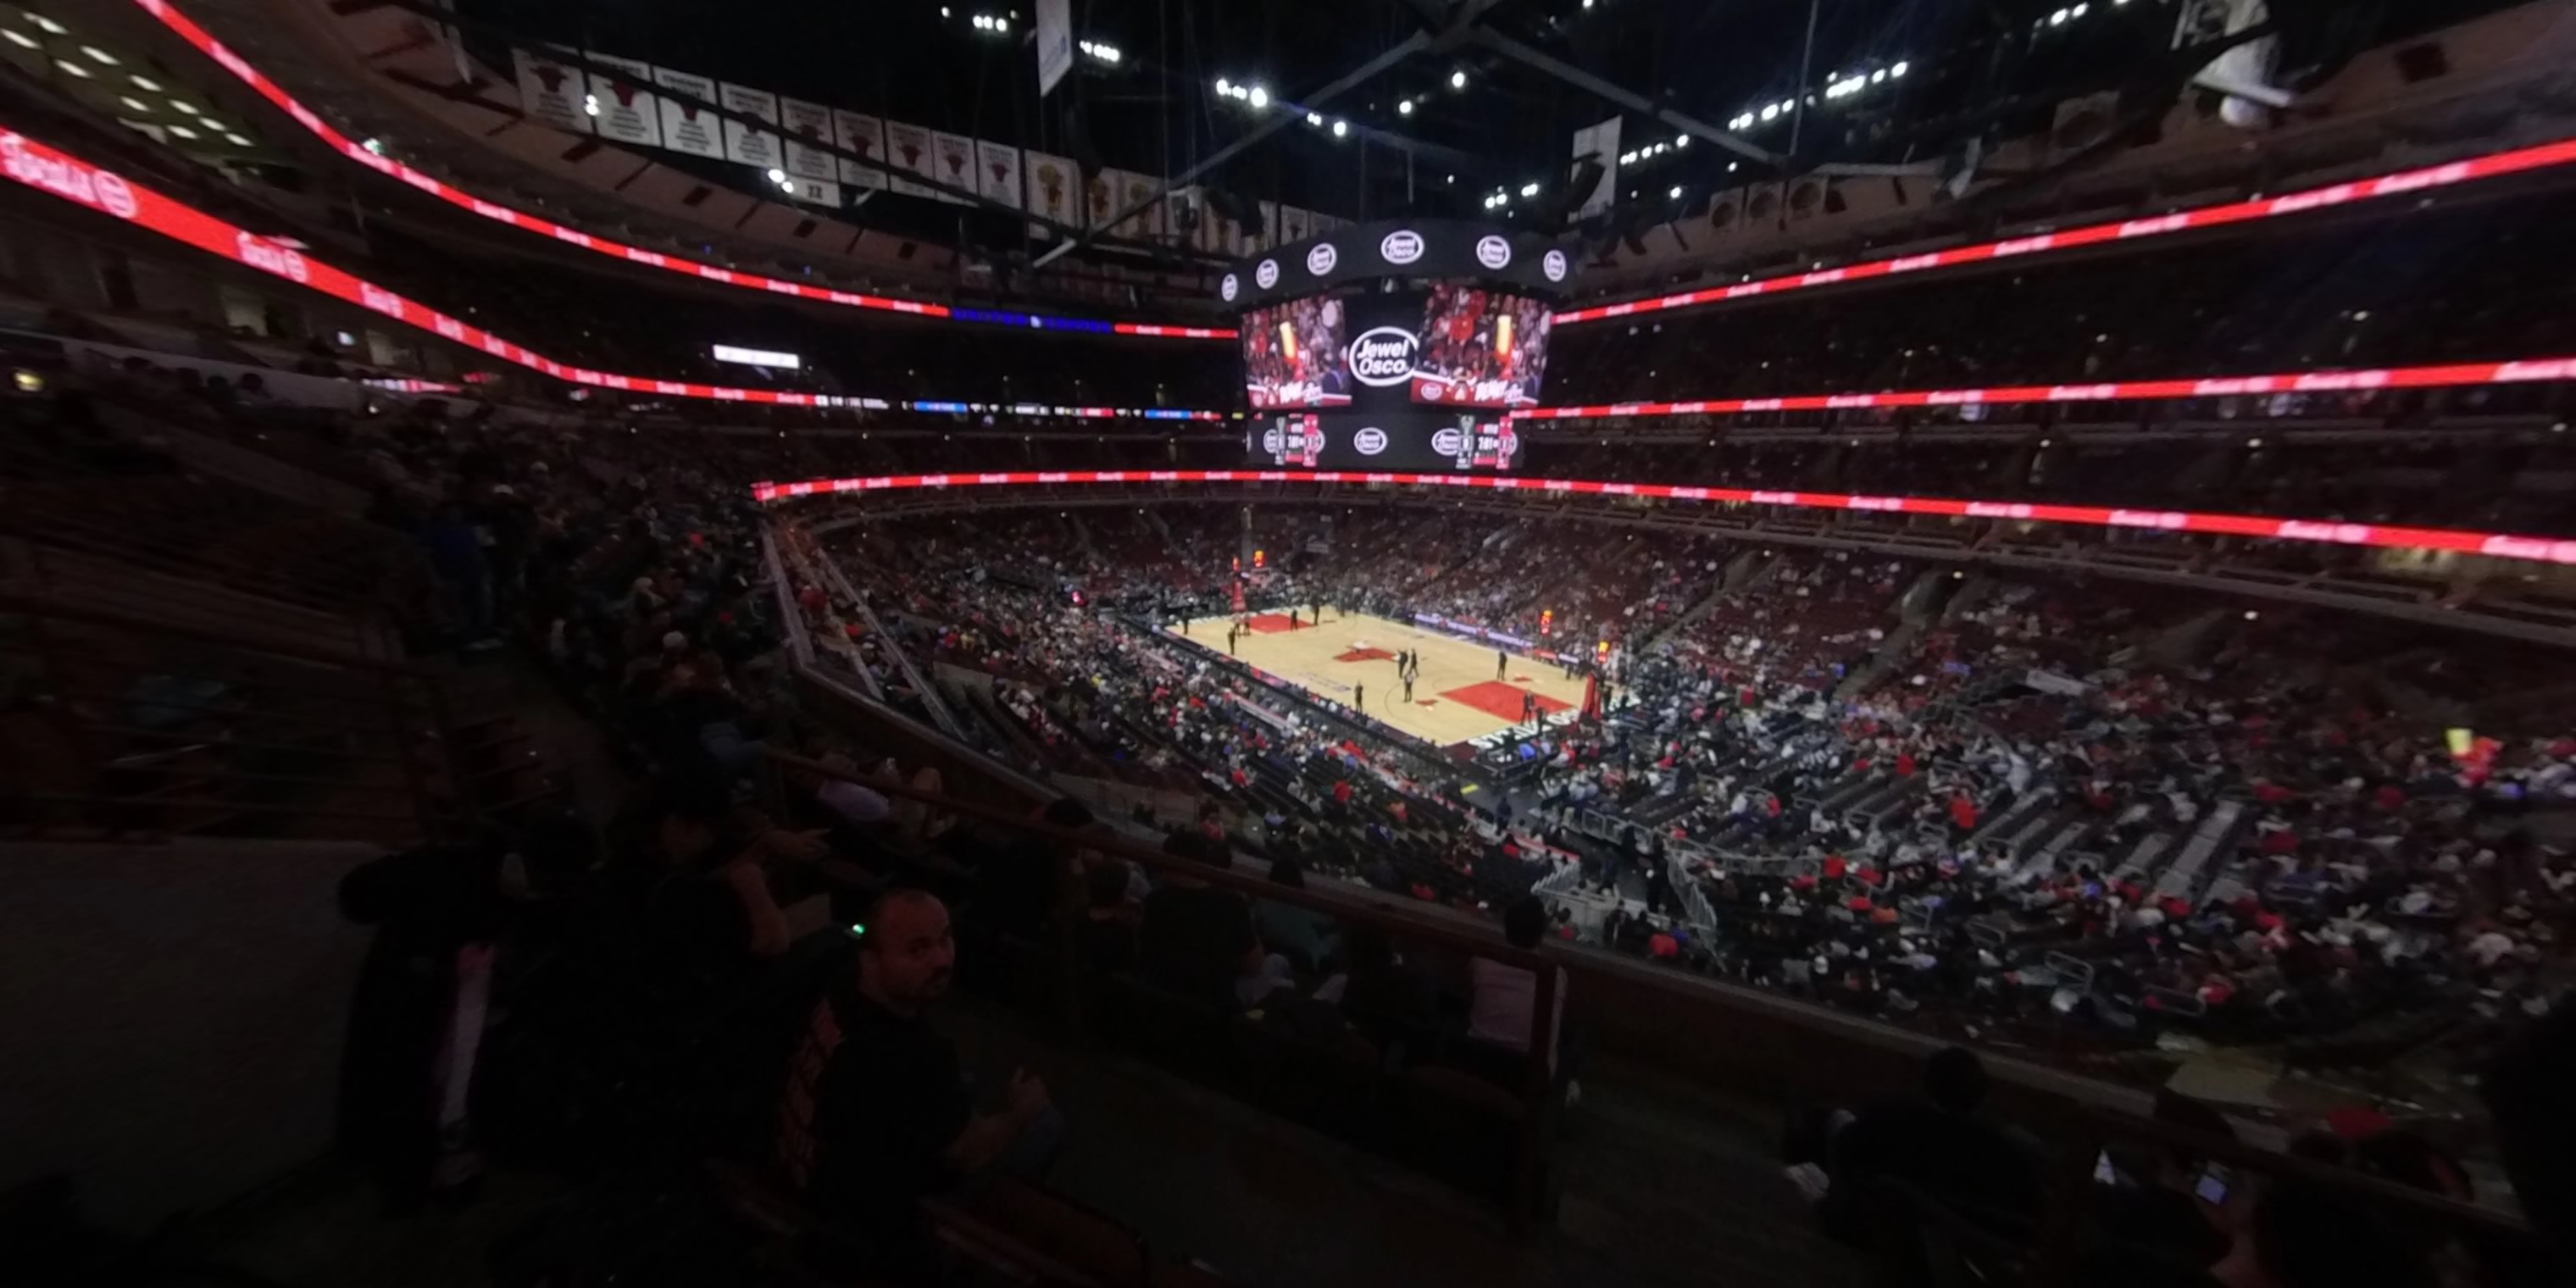 section 213 panoramic seat view  for basketball - united center